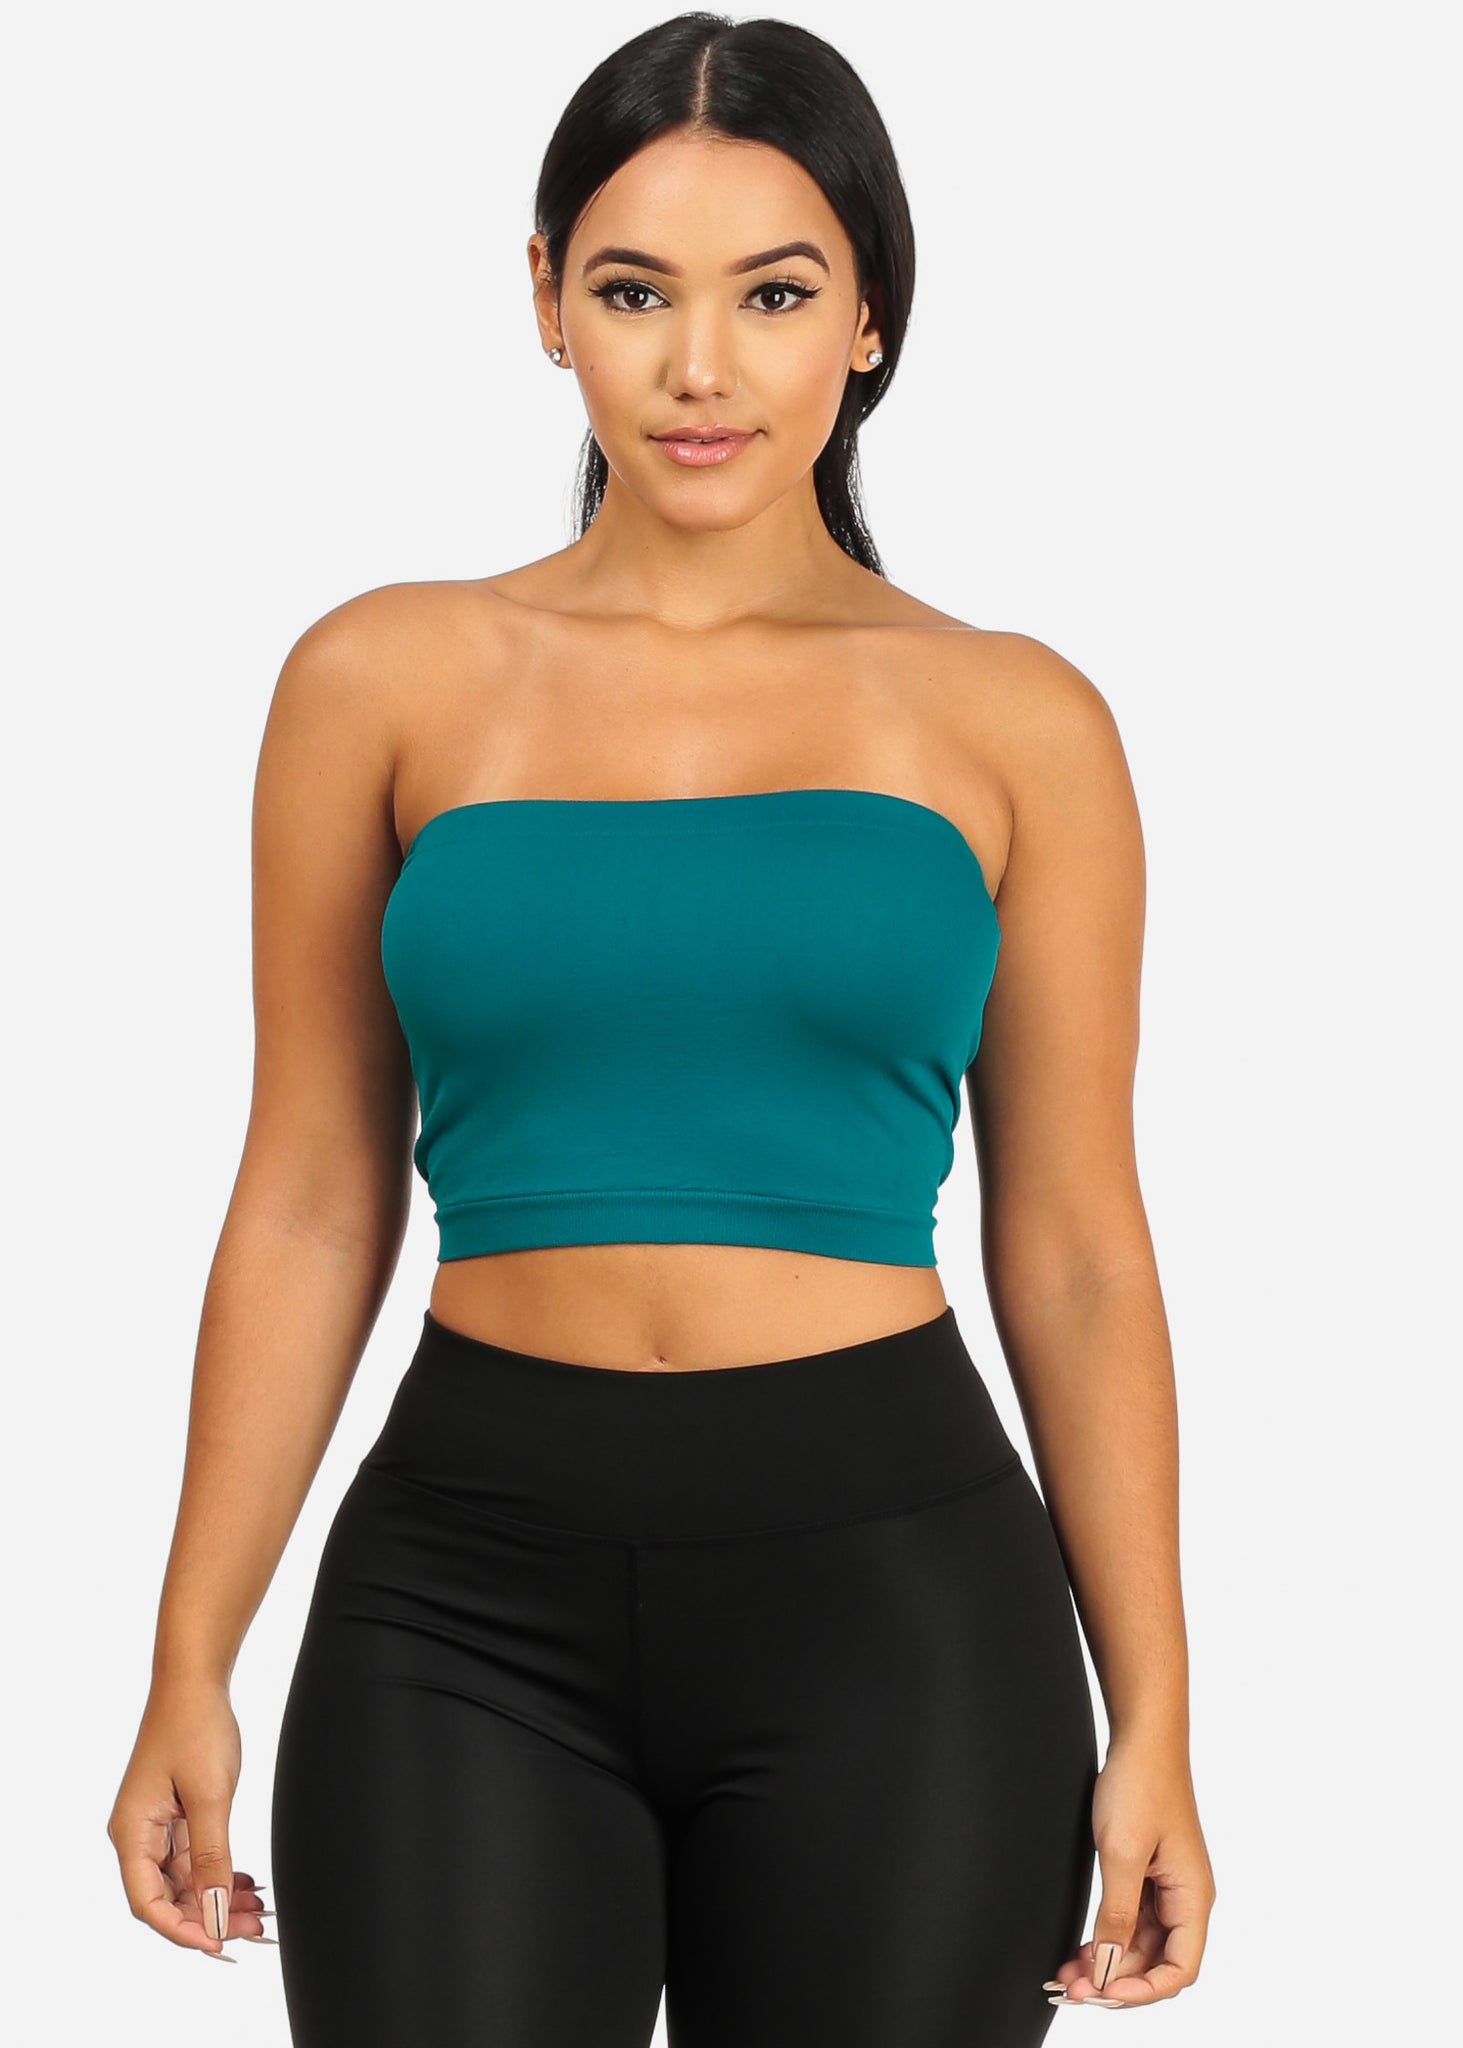 Strapless Women's Teal Blue Tube Top One Size BRA-1115 – One Size Fits